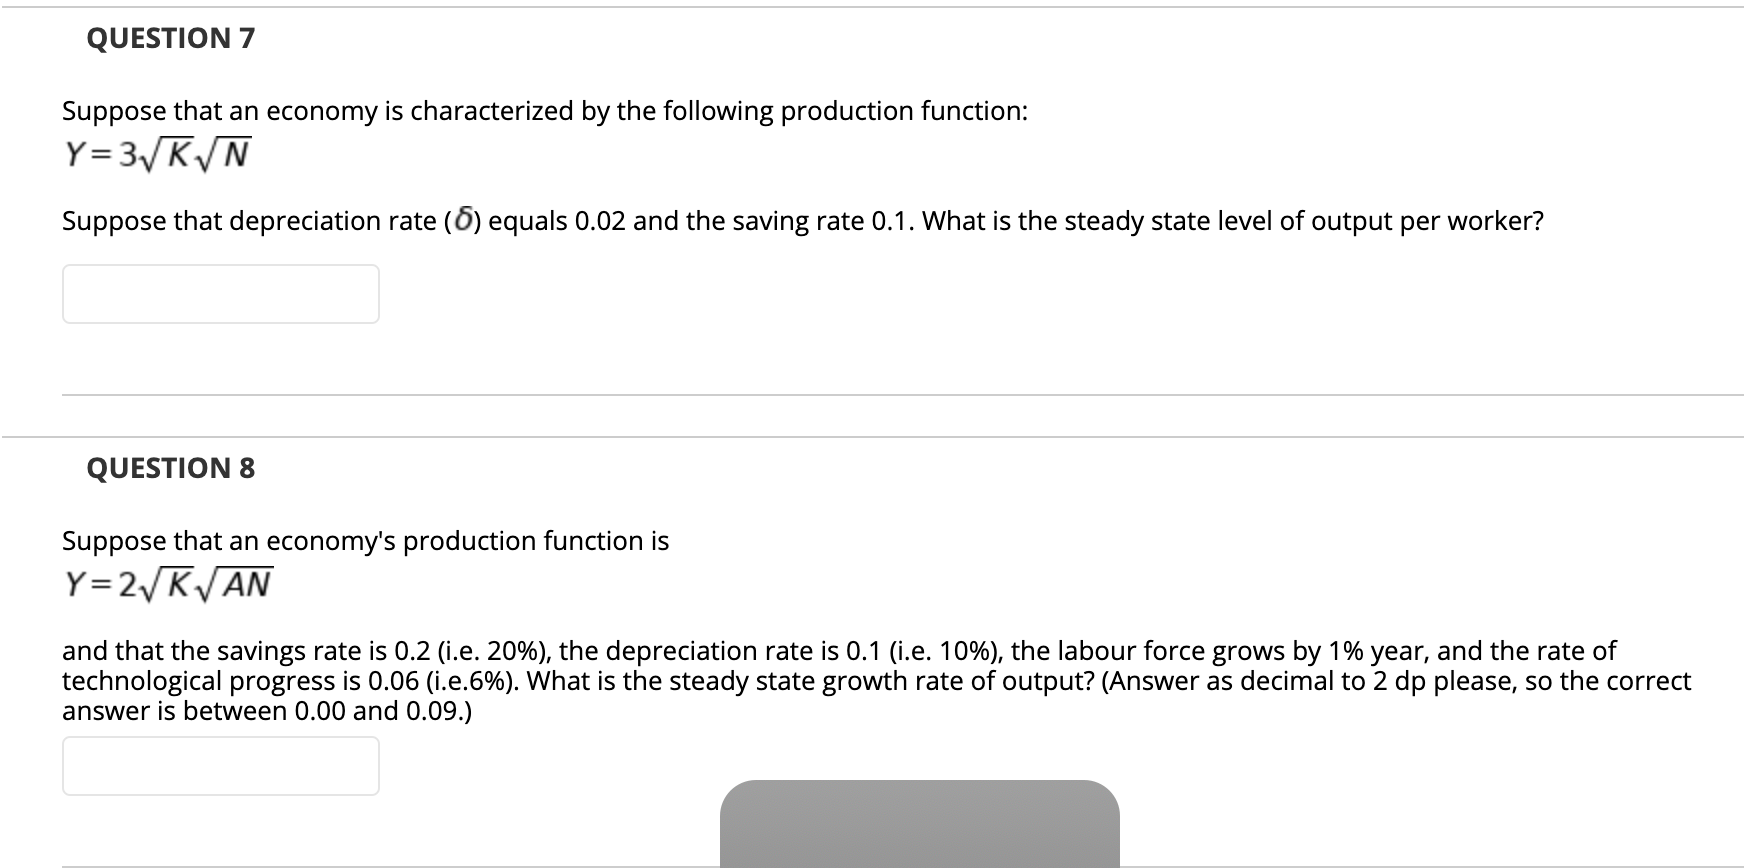 Suppose that an economy is characterized by the following production function:
Y= 3K/N
Suppose that depreciation rate (6) equals 0.02 and the saving rate 0.1. What is the steady state level of output per worker?
